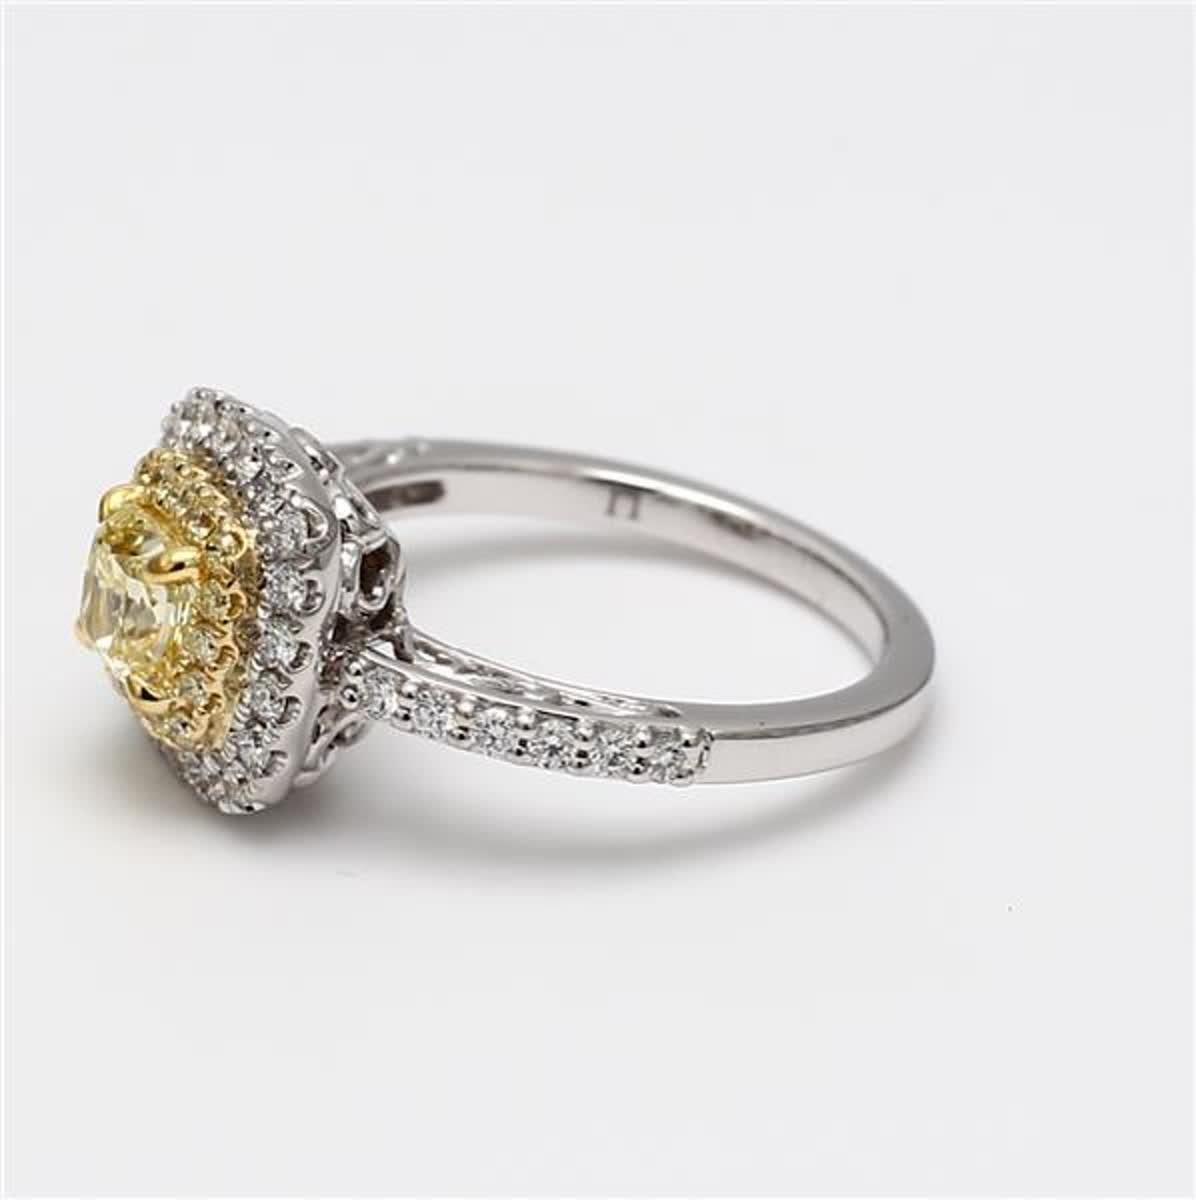 Contemporary GIA Certified Natural Yellow Cushion and White Diamond 1.28 Carat TW Plat Ring